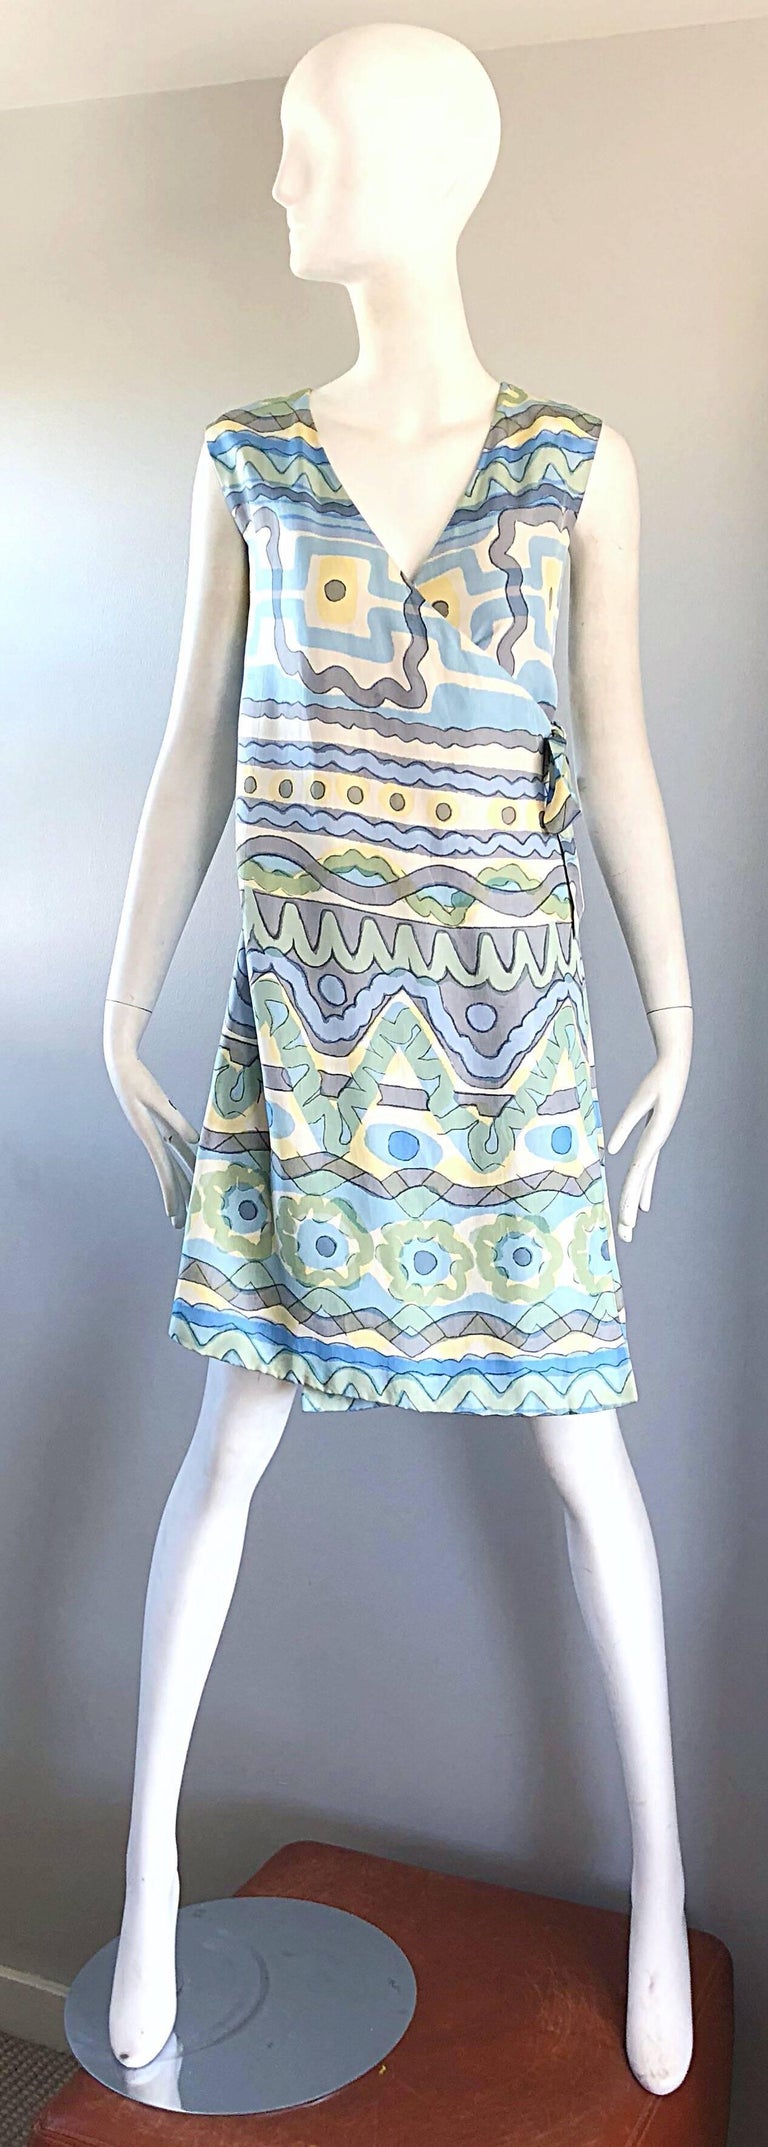 Chic 1960s BH WRAGGE abstract print silk pastel wrap dress! BH Wragge was known for their creative one-of-a-kind bold abstract prints that were both stylish and wearable. This rare gem features prints in pale blue, light green, pale yellow and